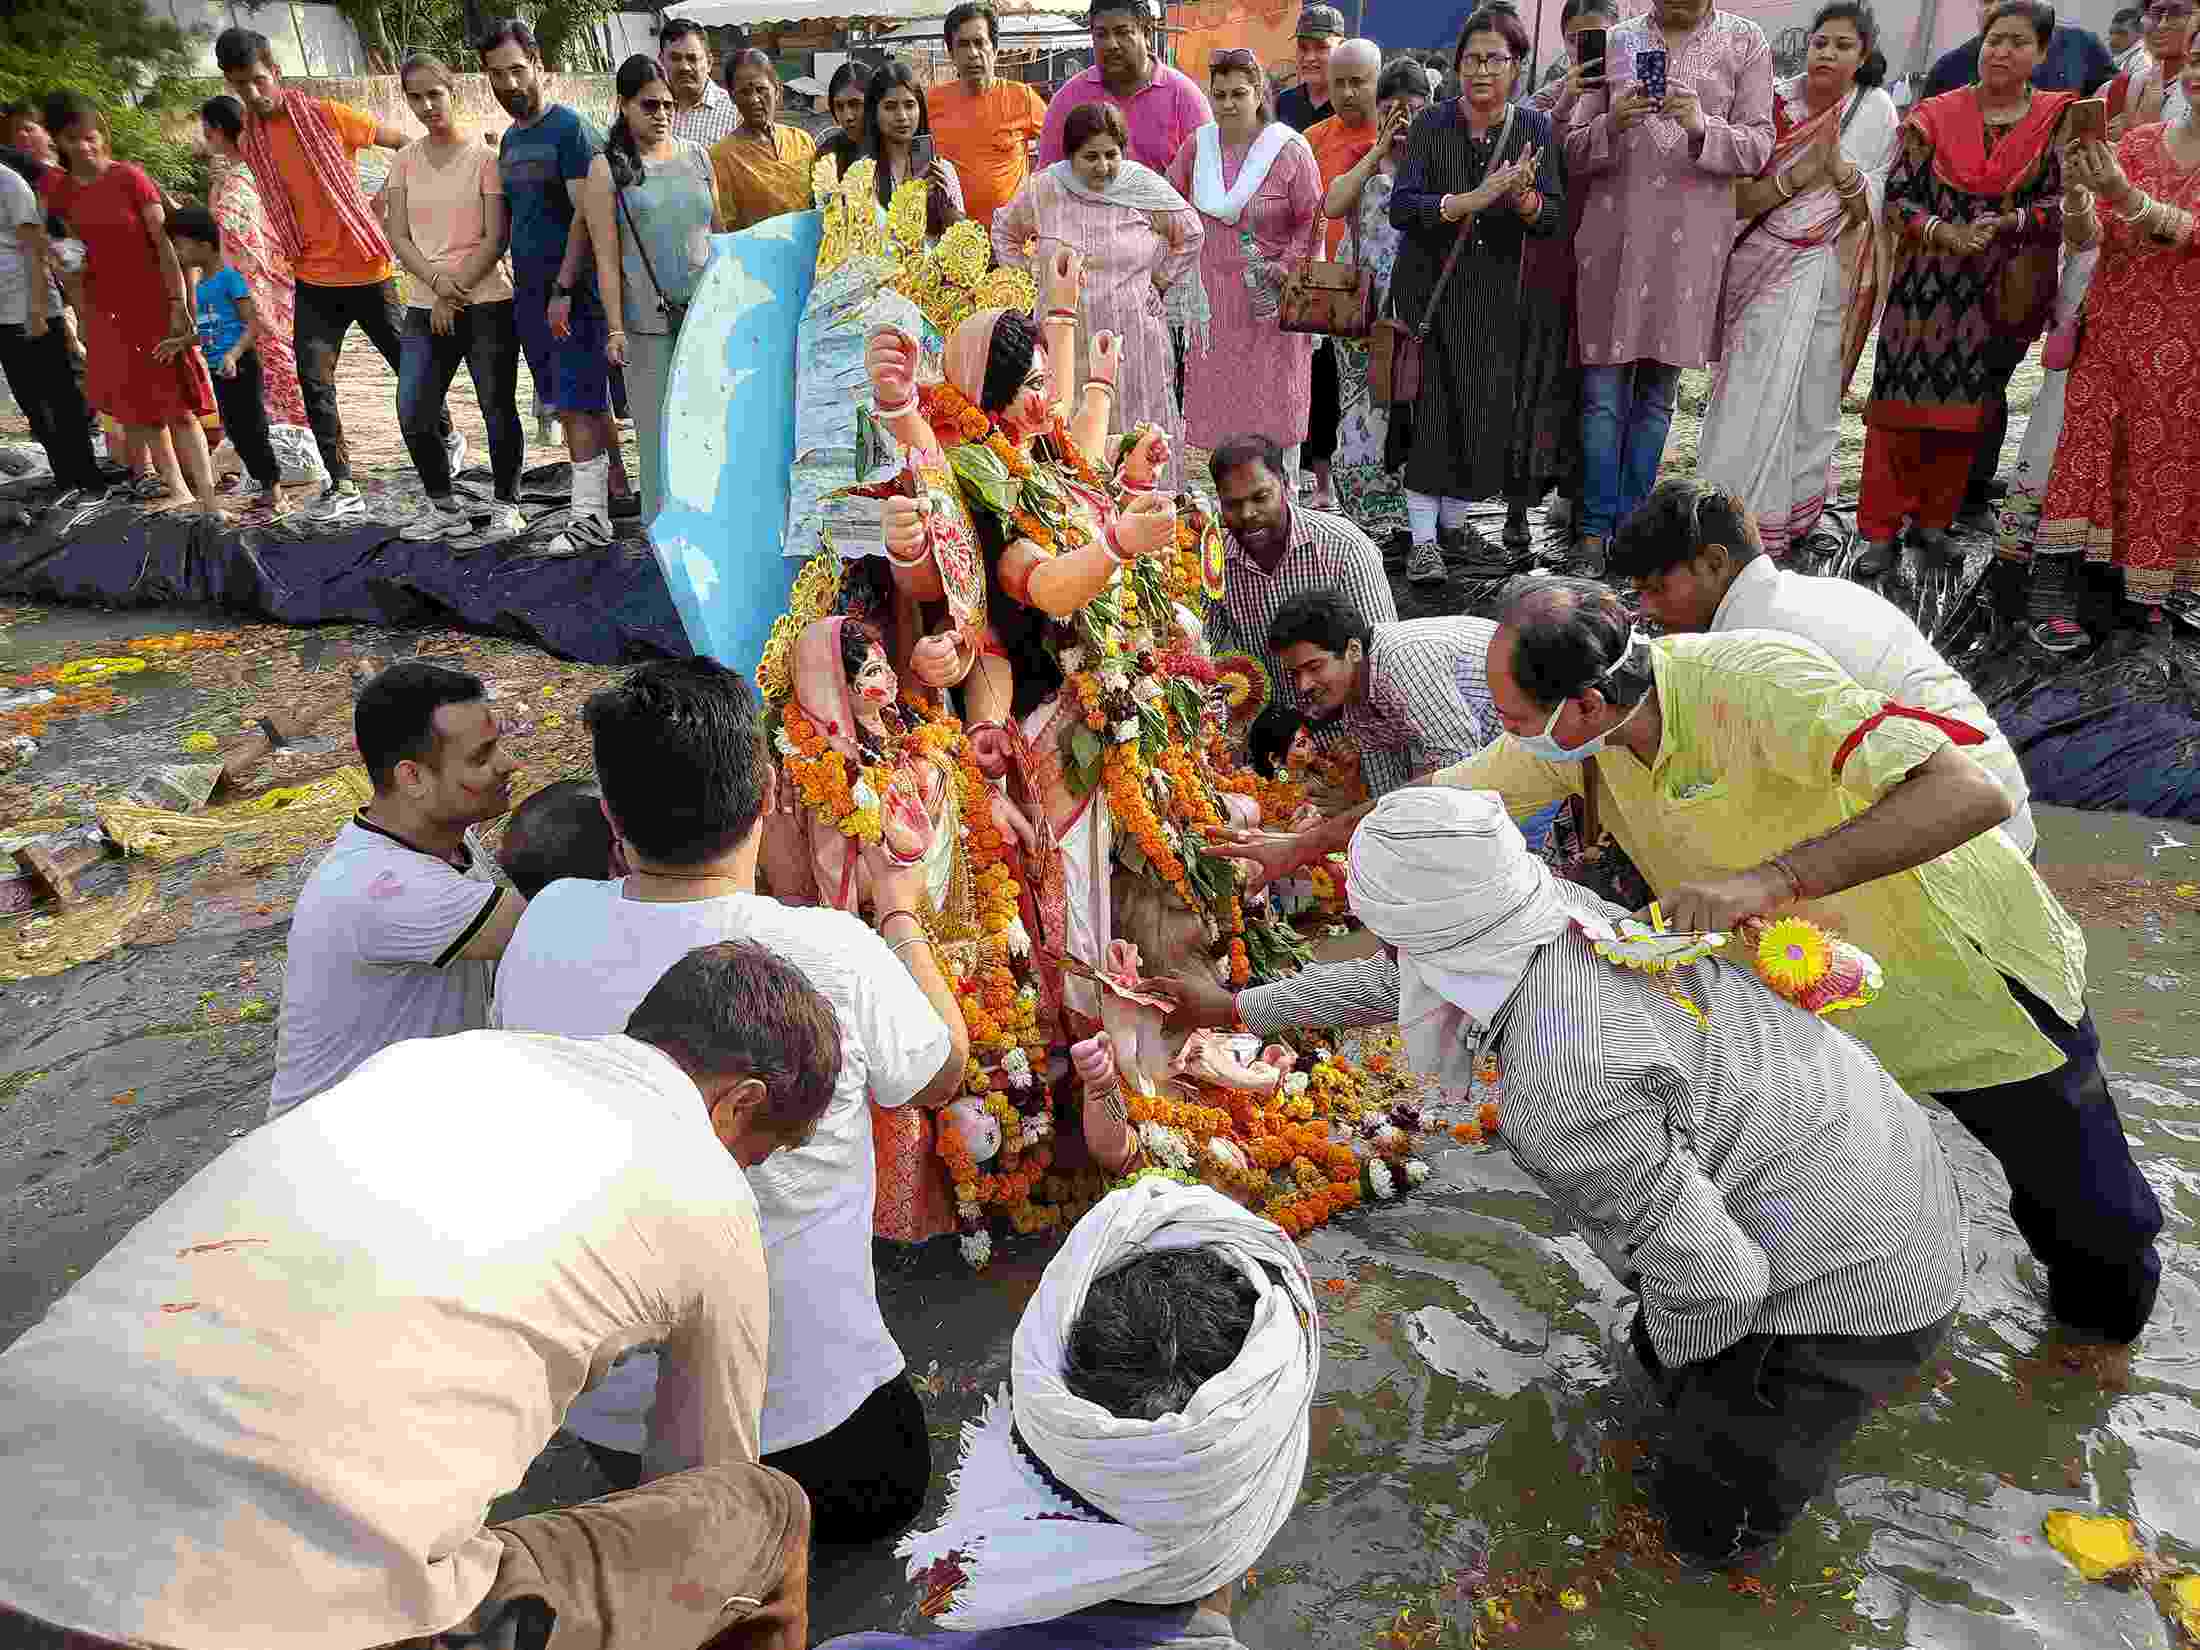 People stand on the edges of an artificial pond, watching as a group of men prepare to lower a colourful idol of the Goddess Durga, laden with flowers, into the pond water